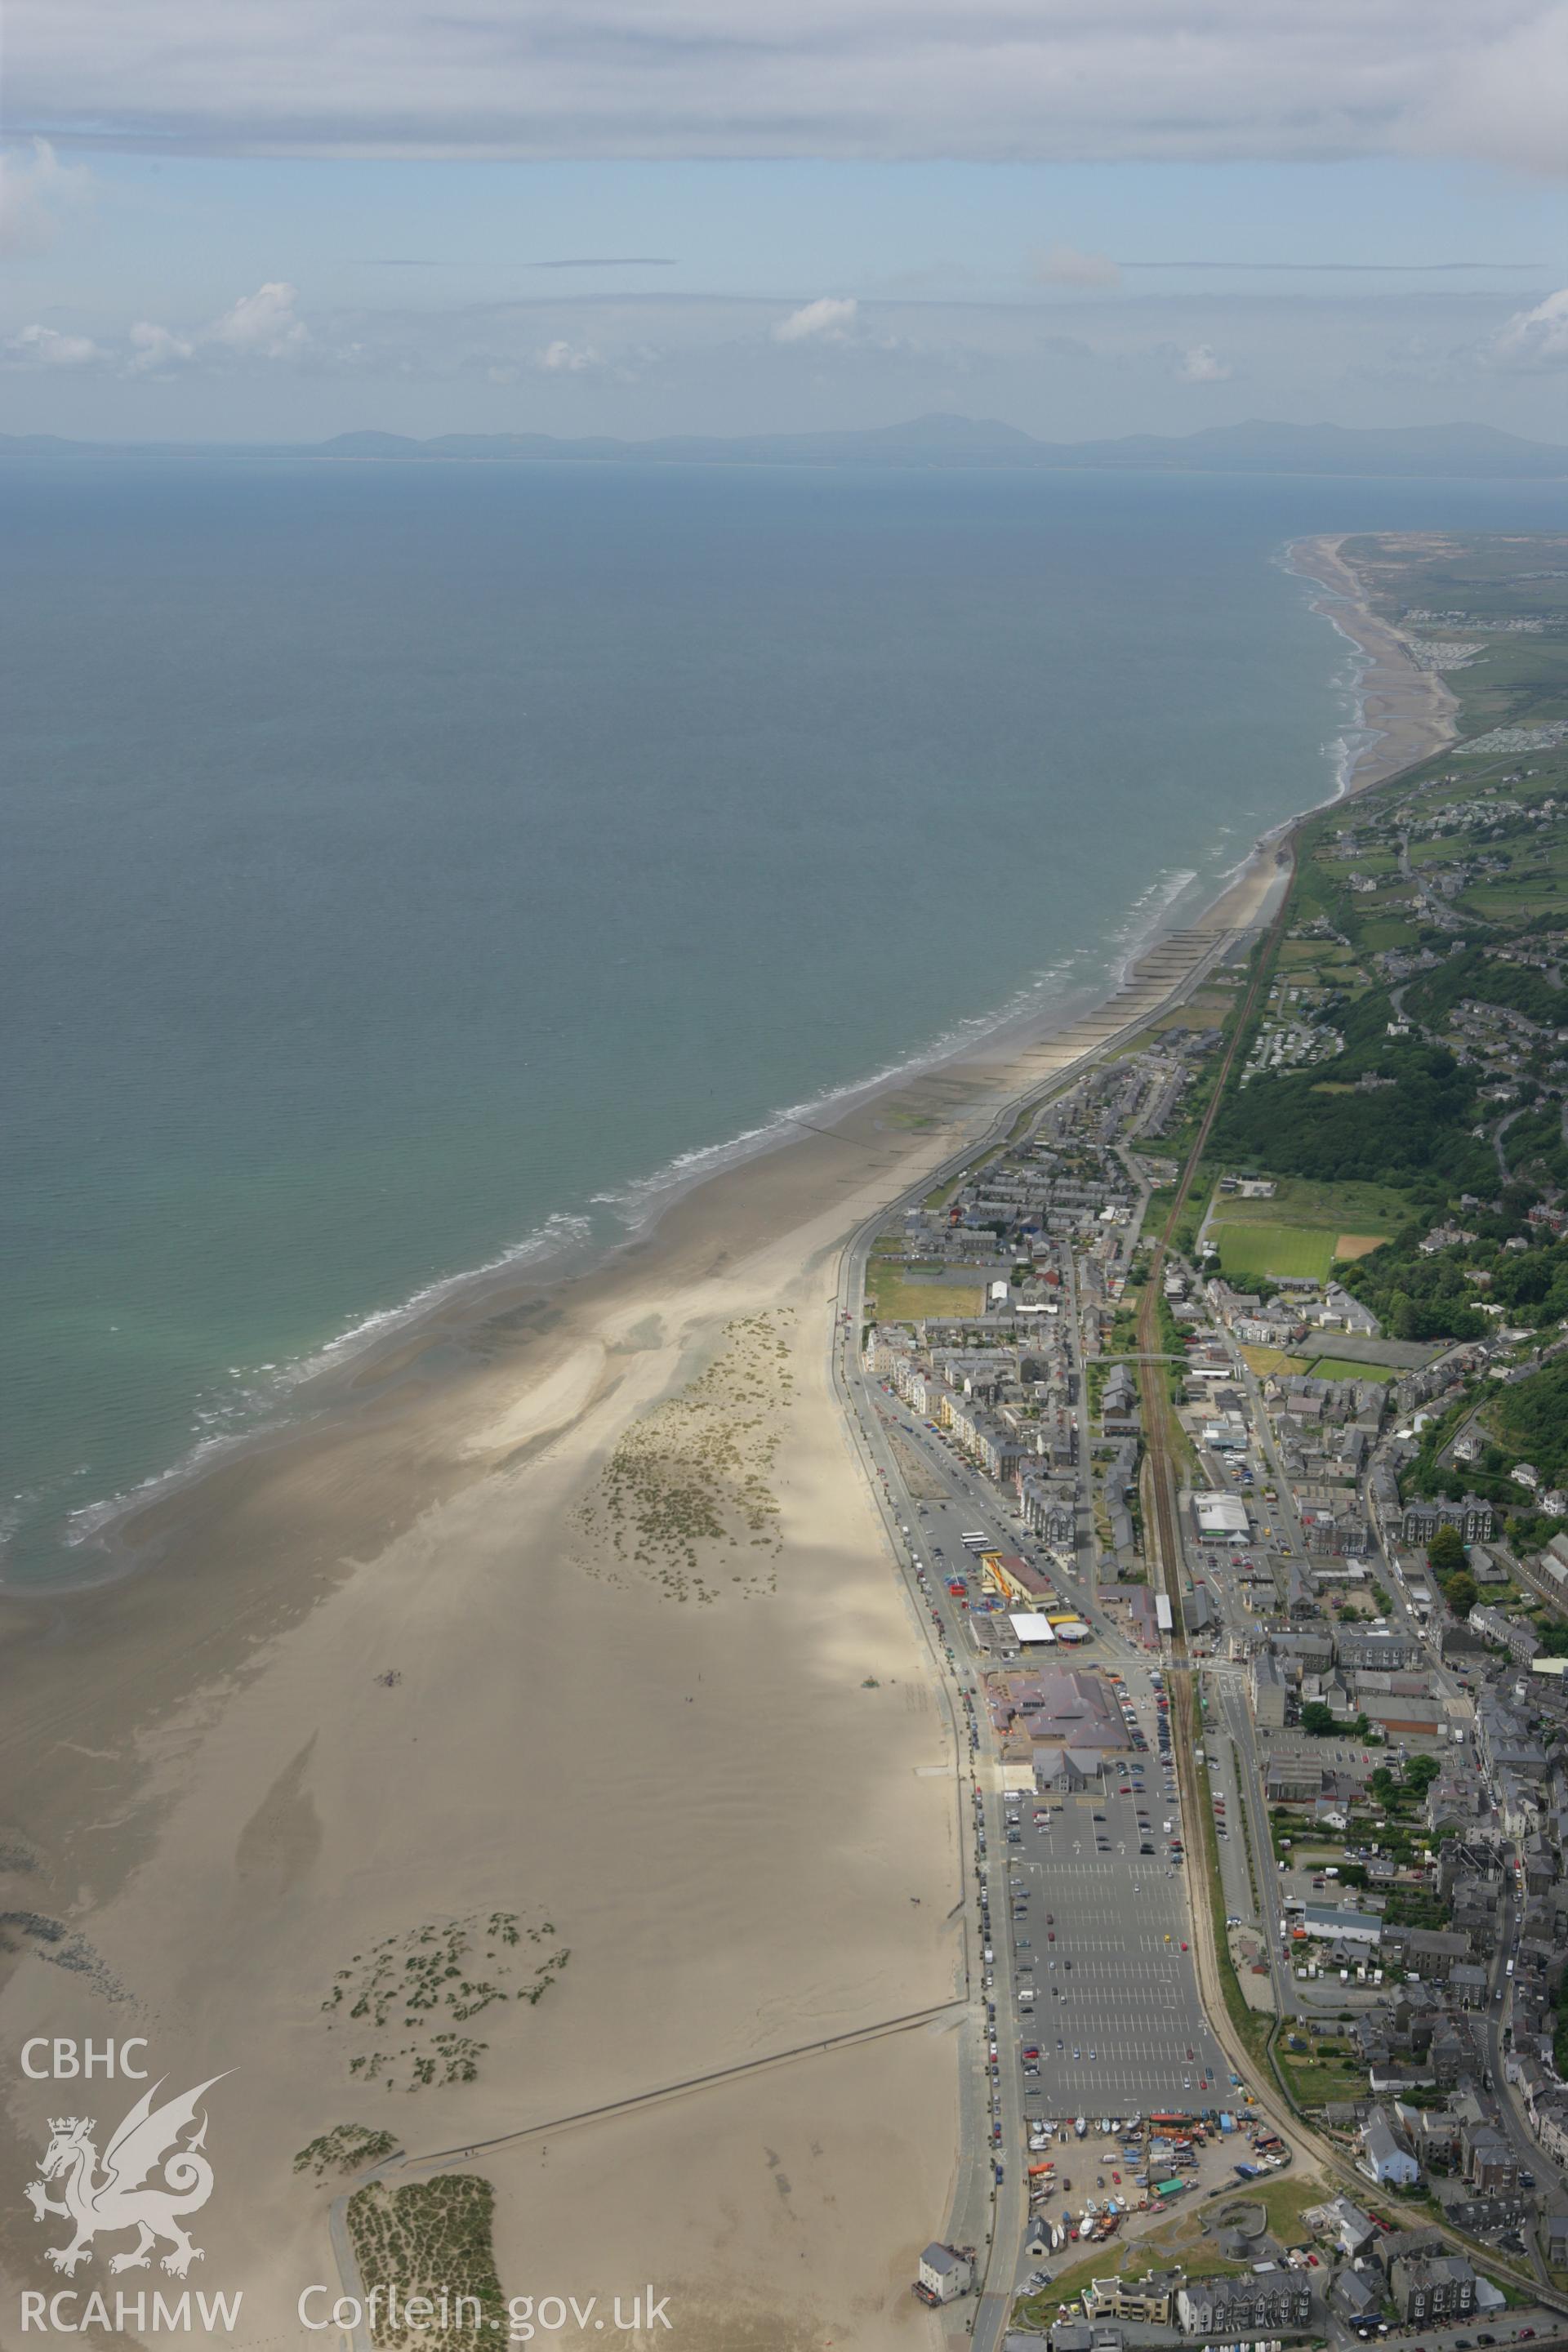 RCAHMW colour oblique photograph of Barmouth, view from the south-east. Taken by Toby Driver on 13/06/2008.